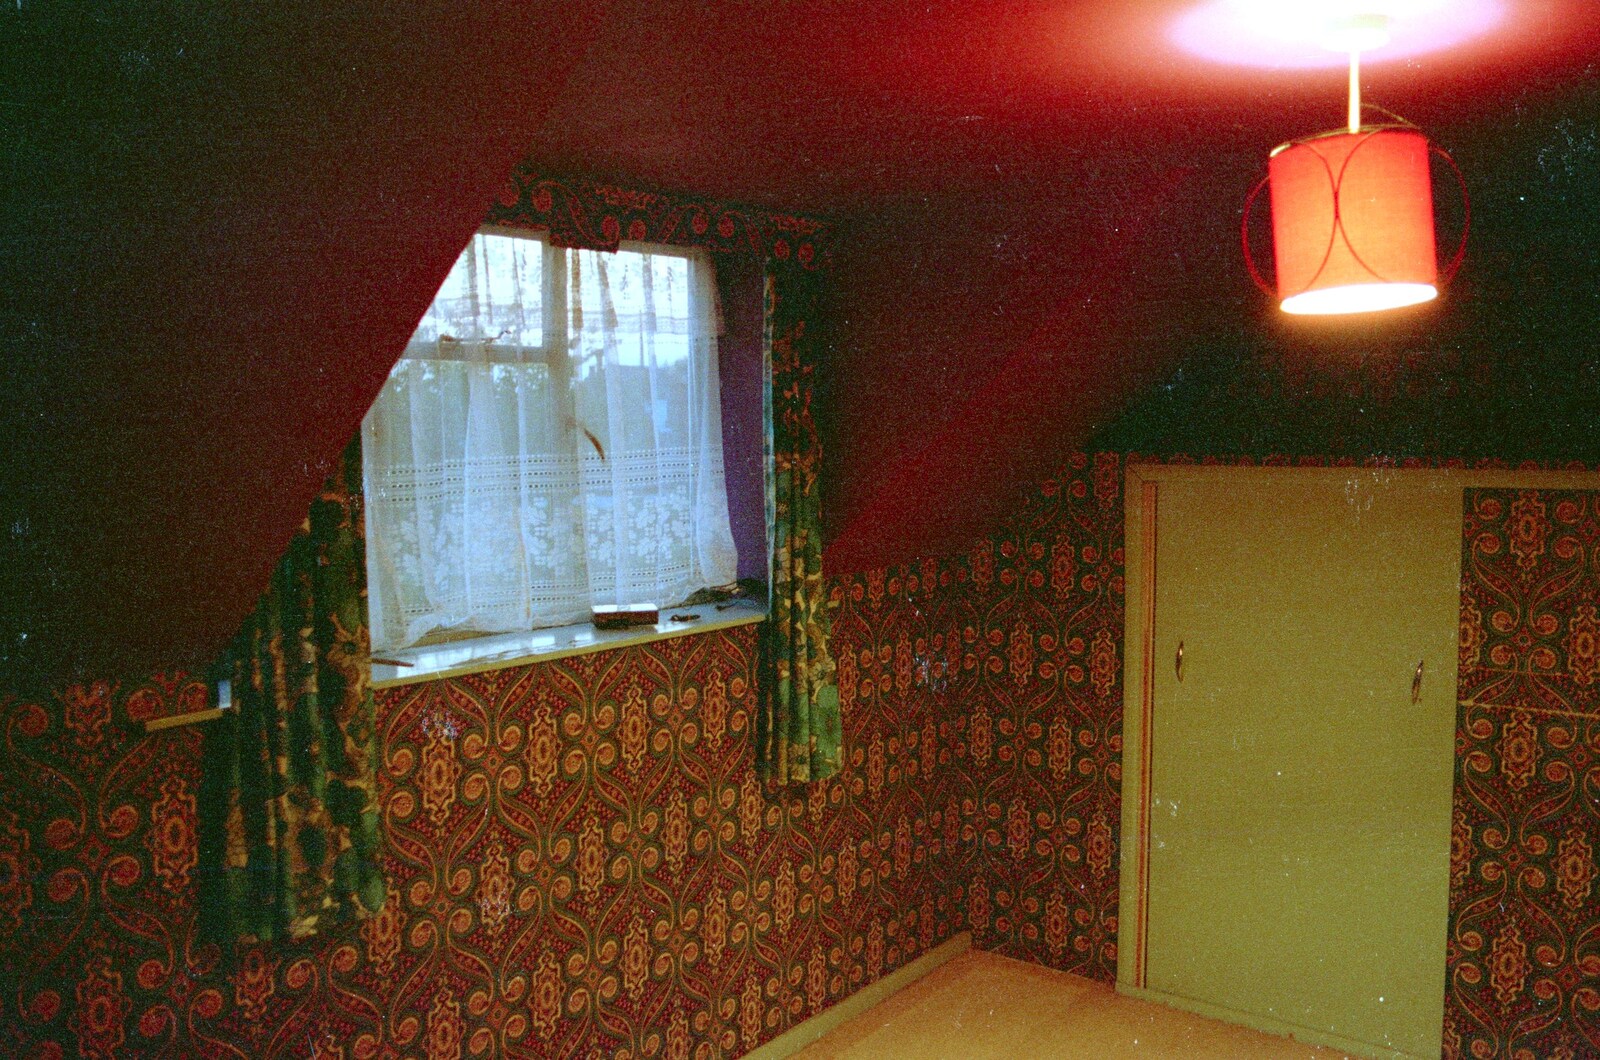 The other side of the attic room from Bracken Way, Walkford, Dorset - 15th September 1986